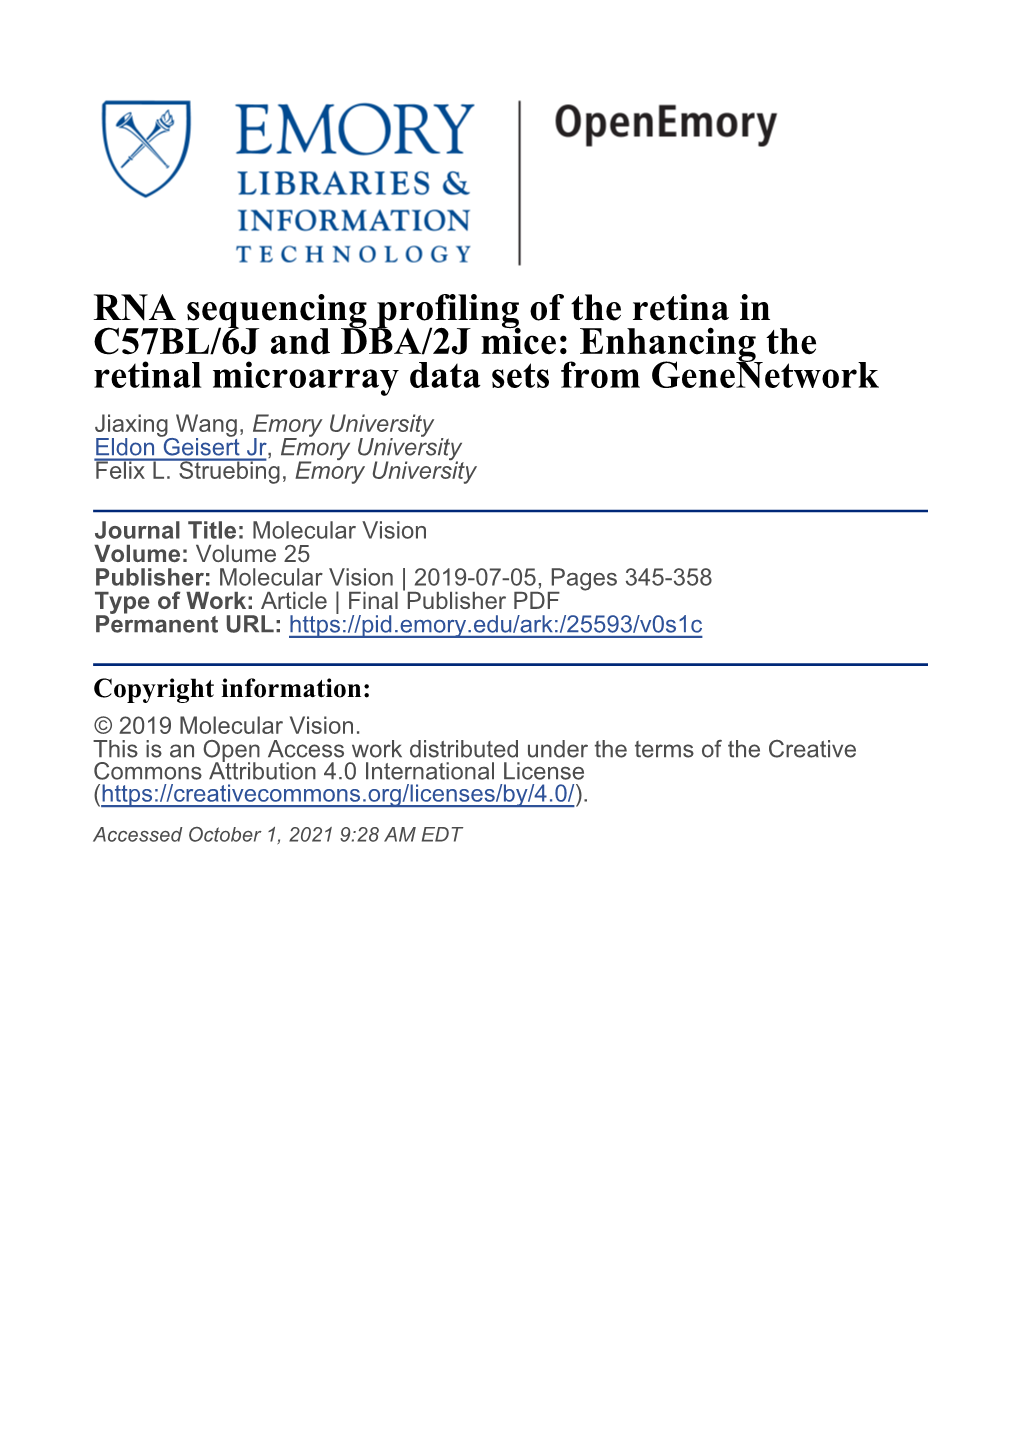 RNA Sequencing Profiling of the Retina in C57BL/6J and DBA/2J Mice: Enhancing the Retinal Microarray Data Sets from Genenetwork